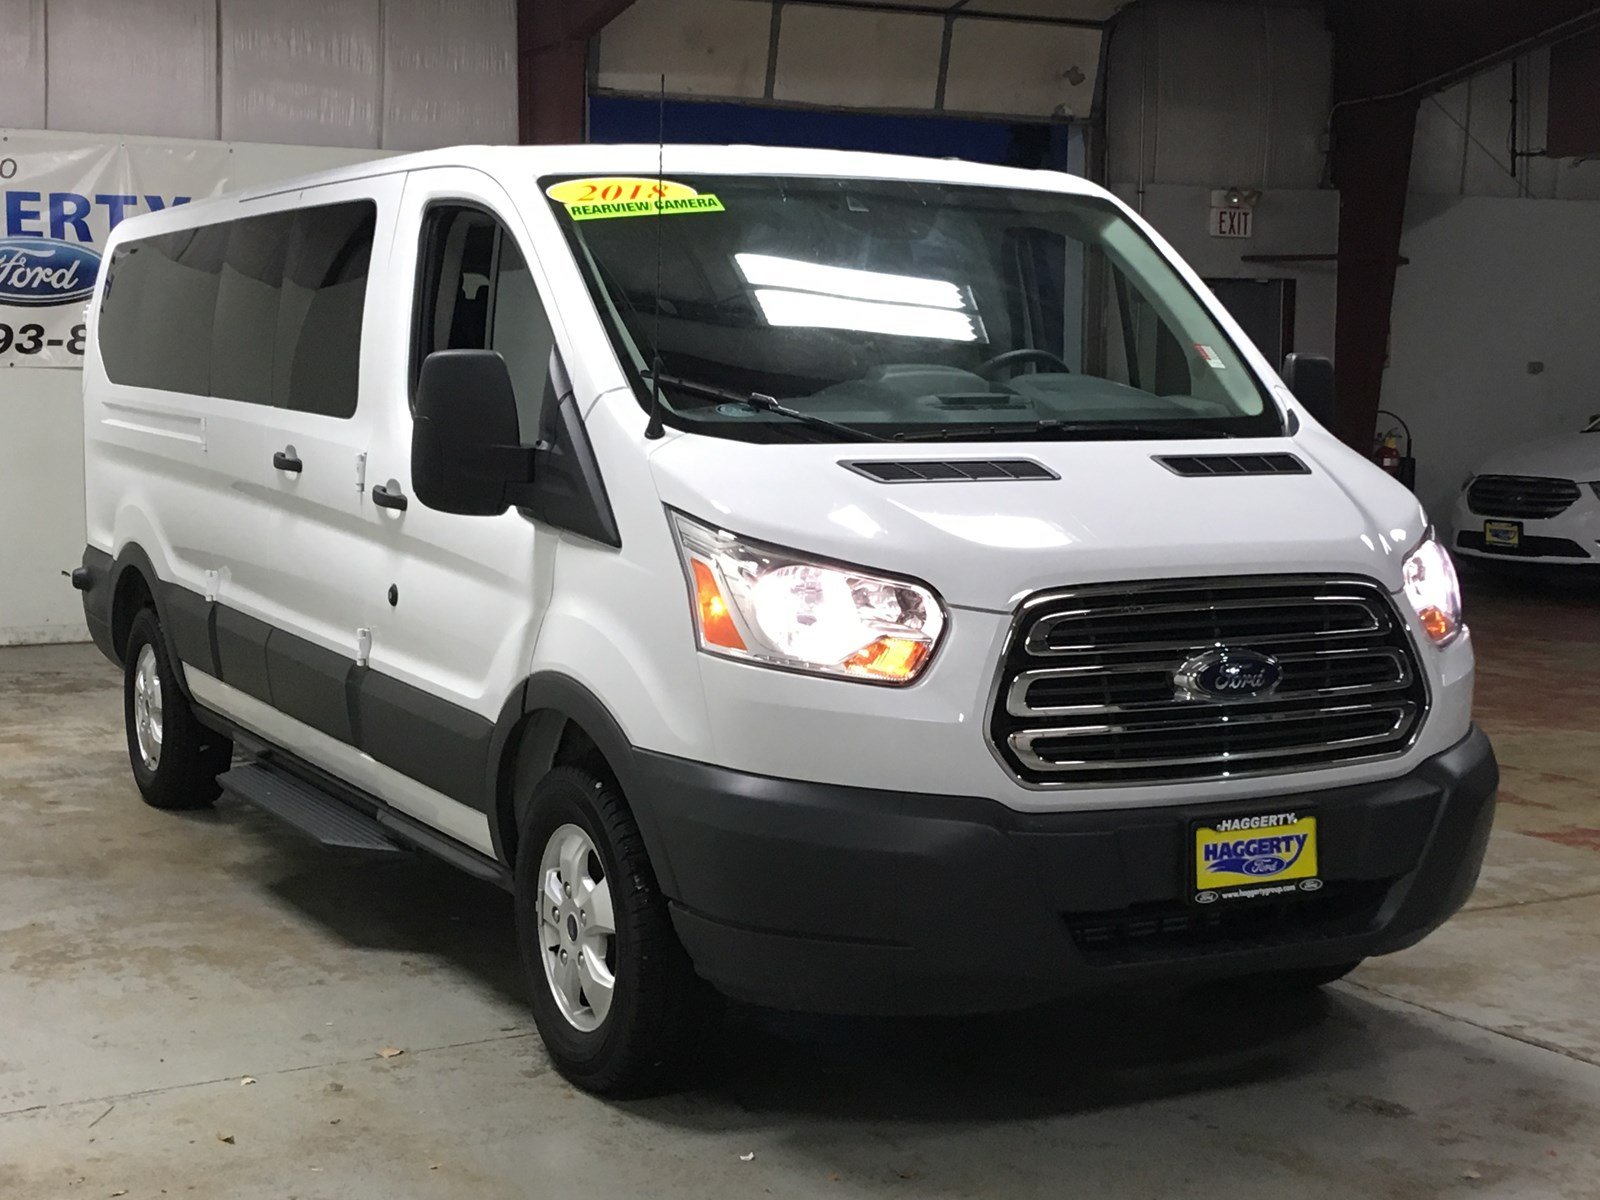 Certified Pre-Owned 2018 Ford Transit Passenger Wagon XLT Ecoboost 15